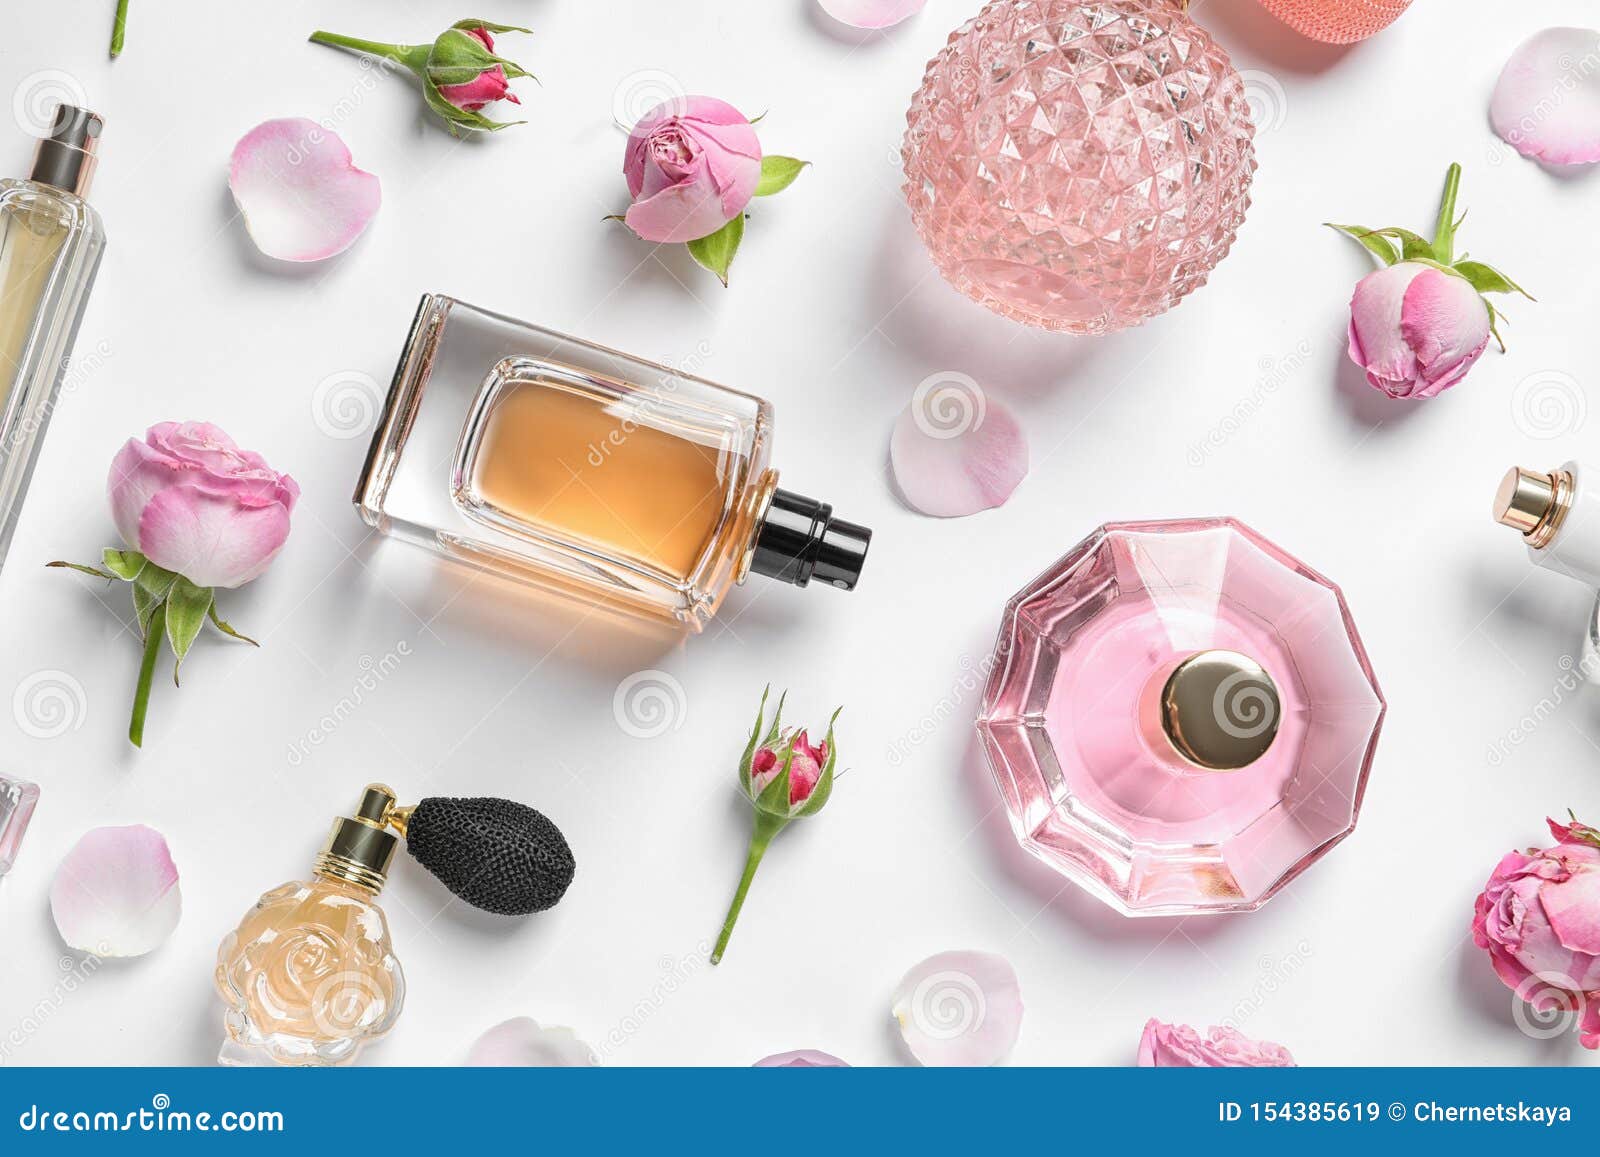 different perfume bottles and flowers on white, top view